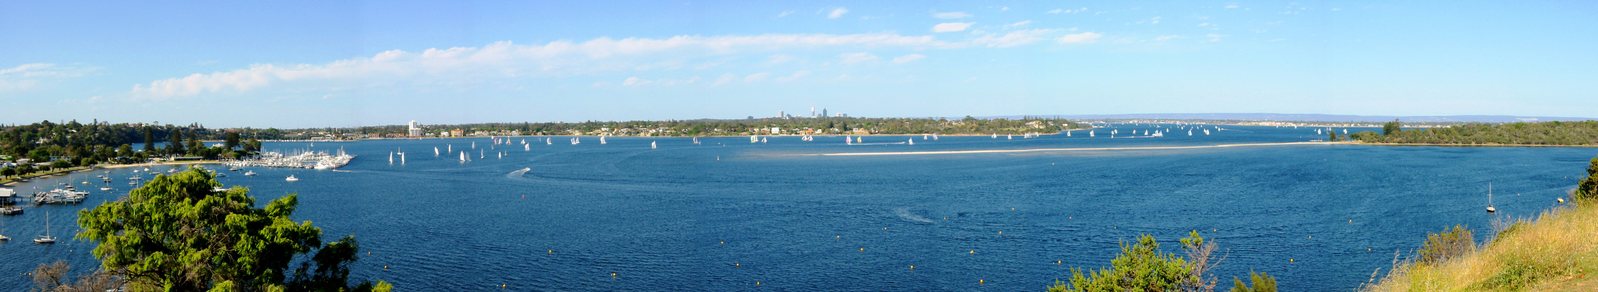 a large blue lake with many sail boats on it